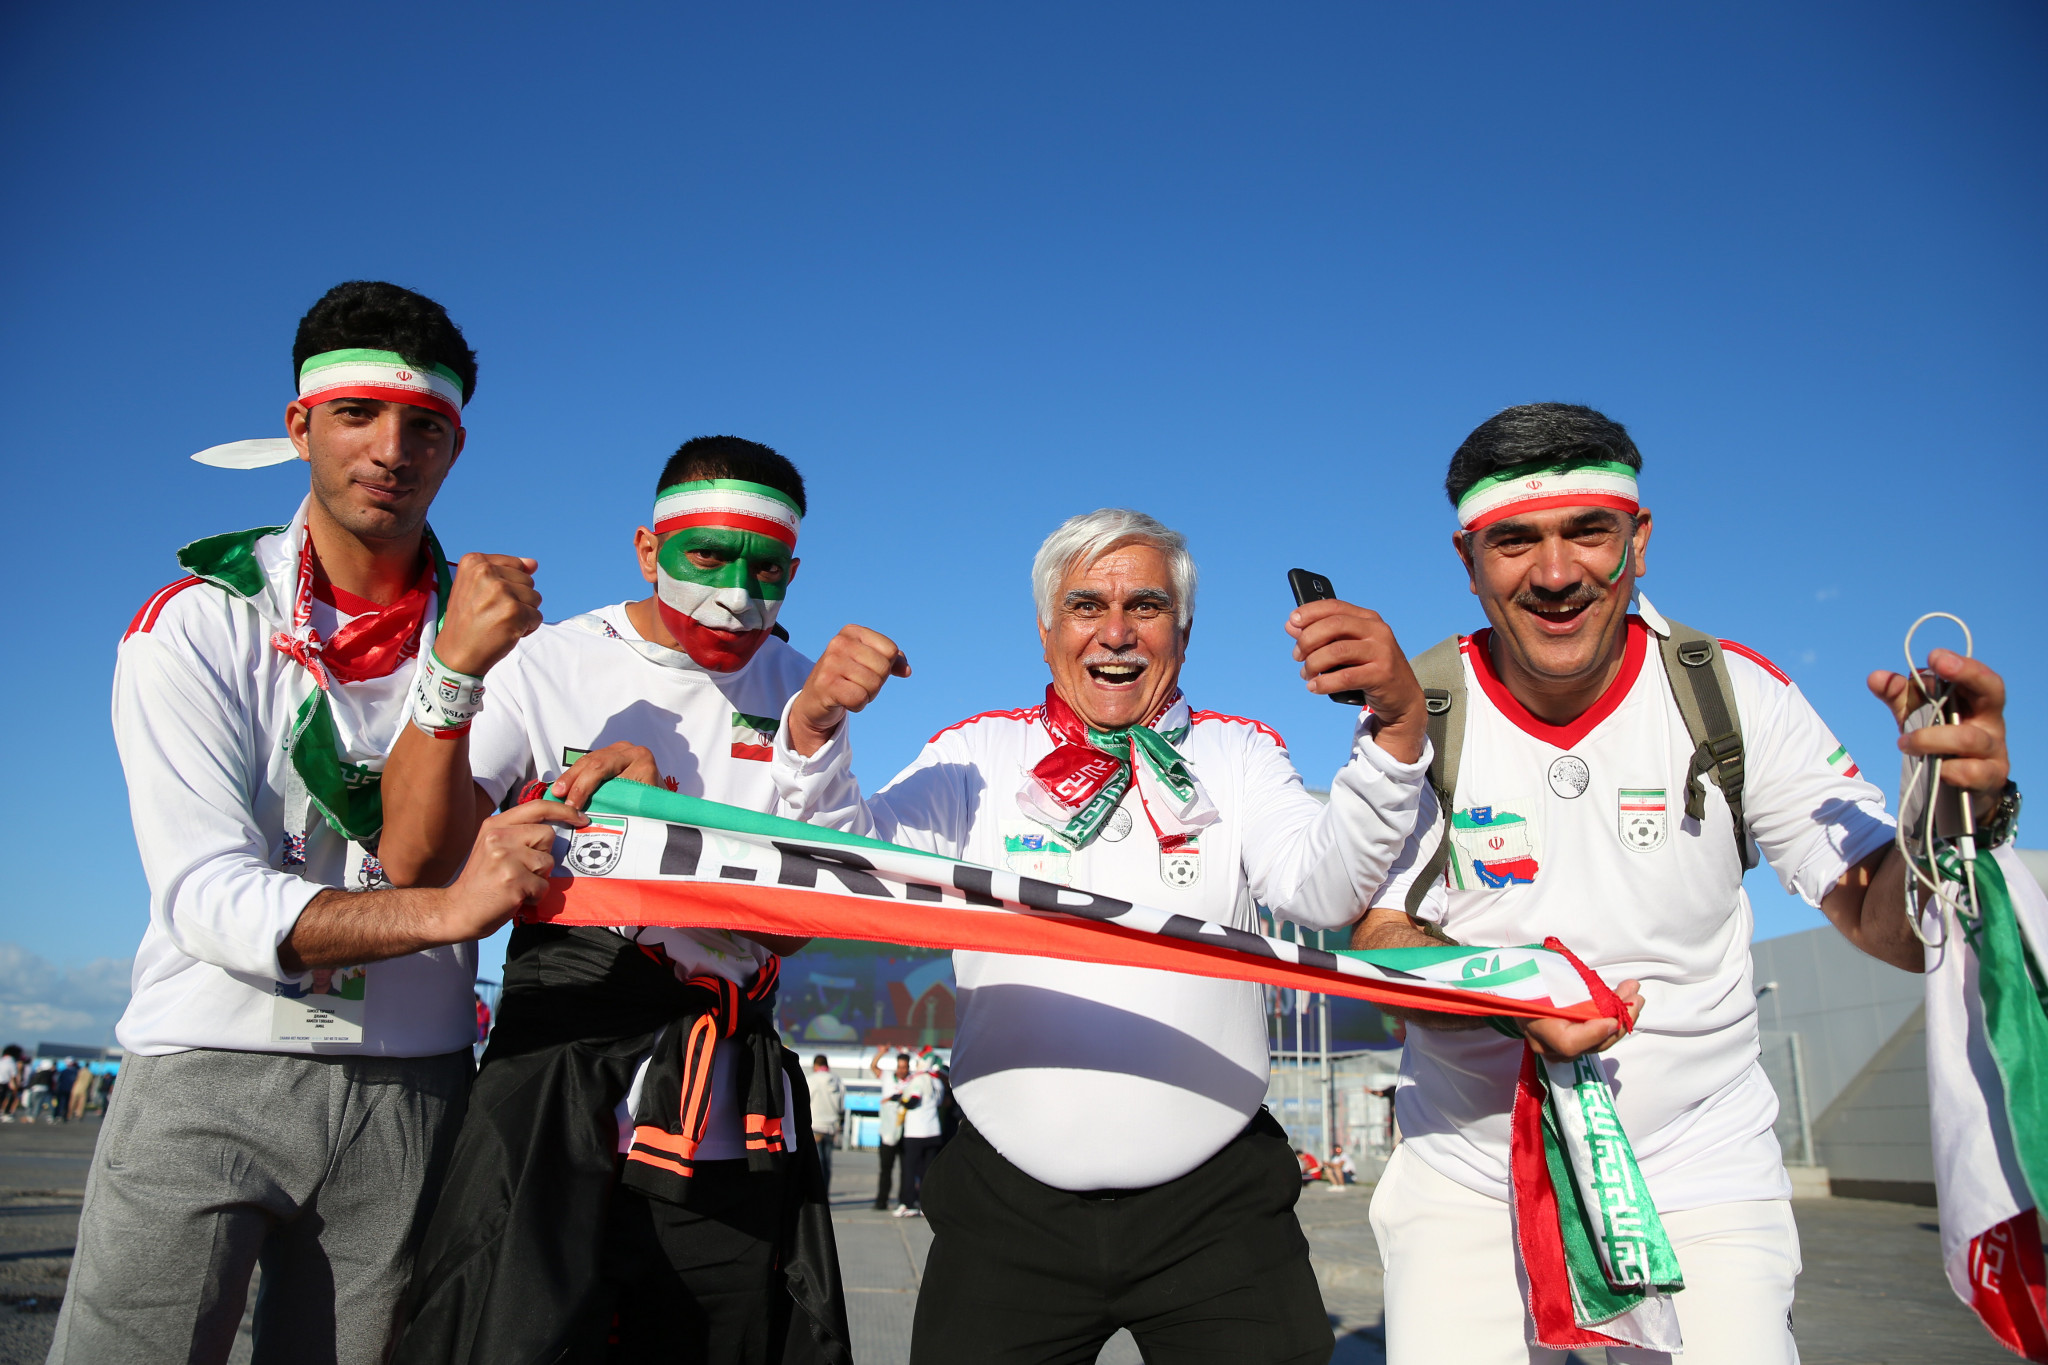 Iran fans prepare for the clash with Spain in the Kazan sunshine ©Getty Images